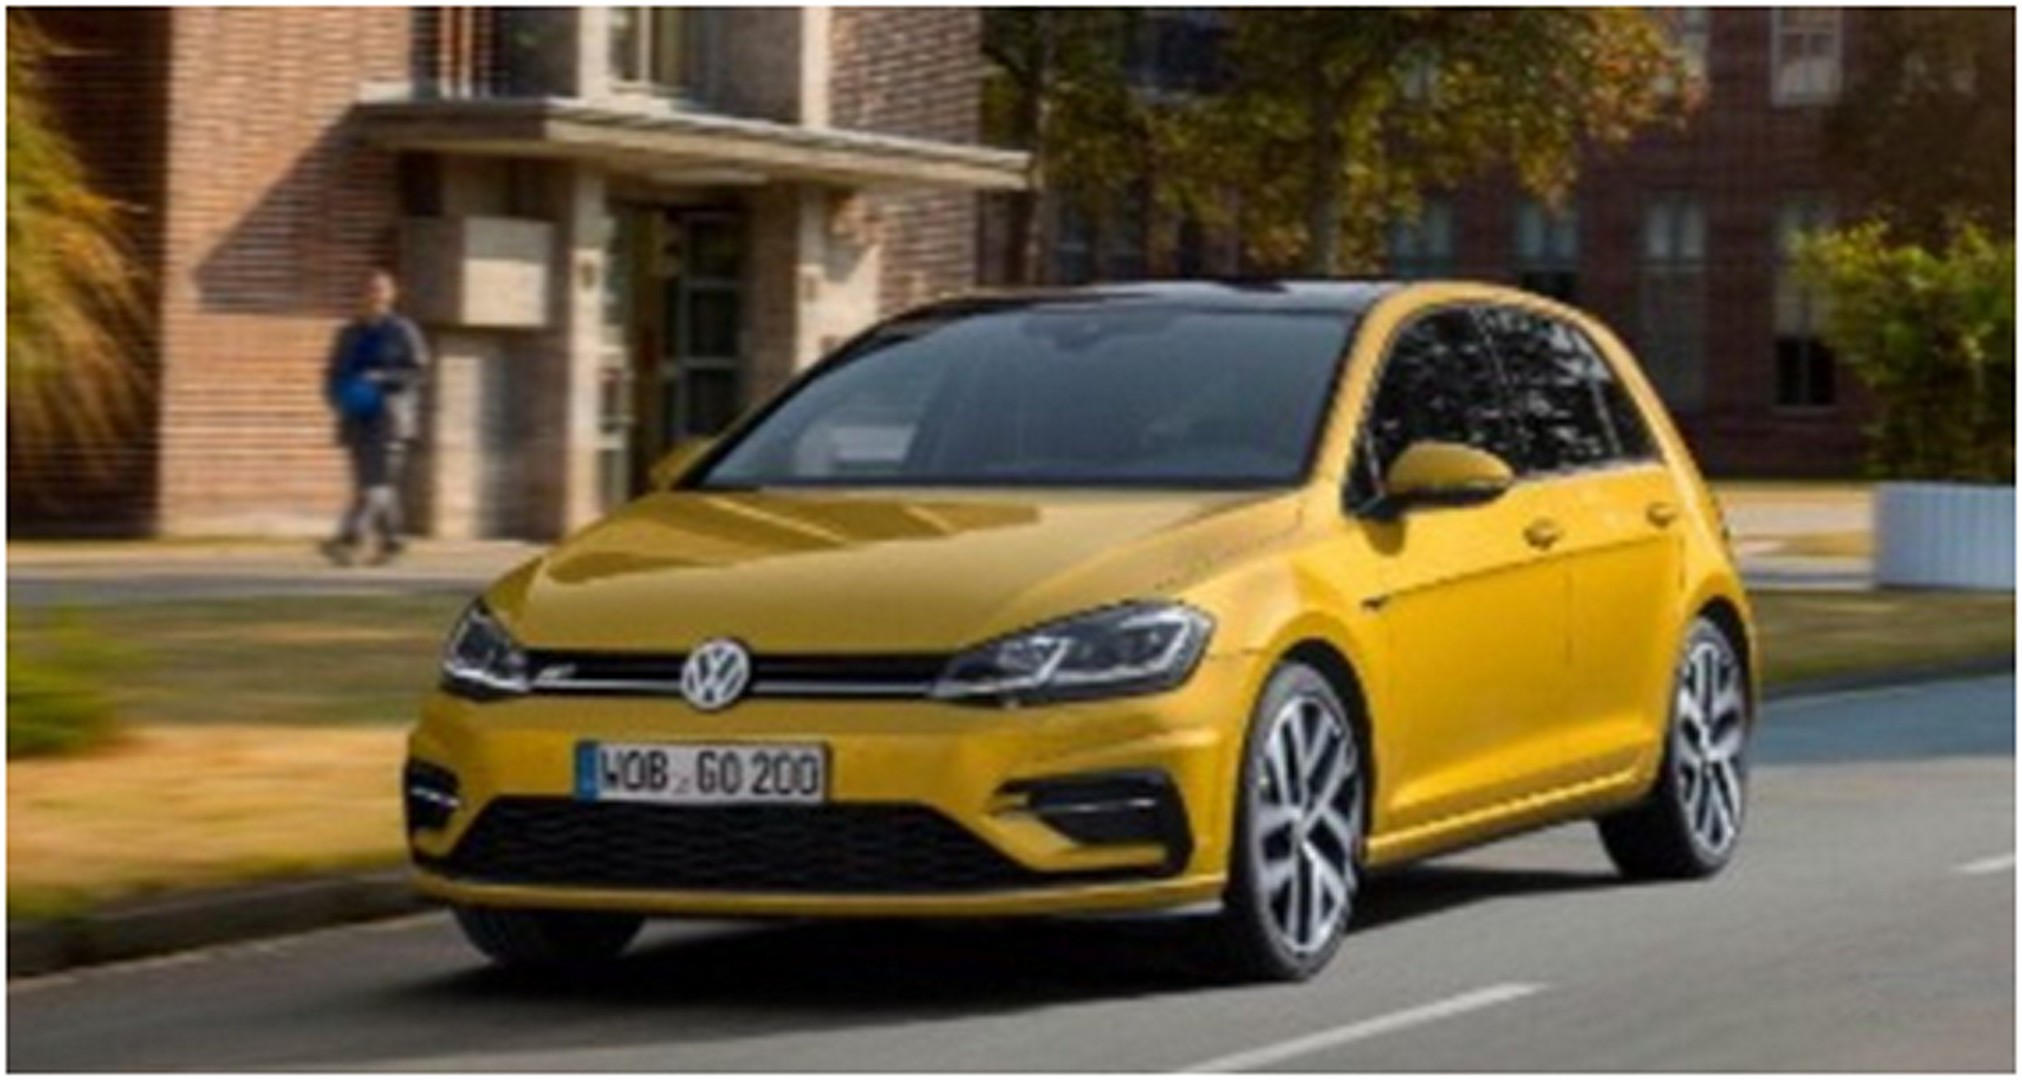 2017 VW Golf Facelift Leaked in Stunning Liquid Gold Color - autoevolution